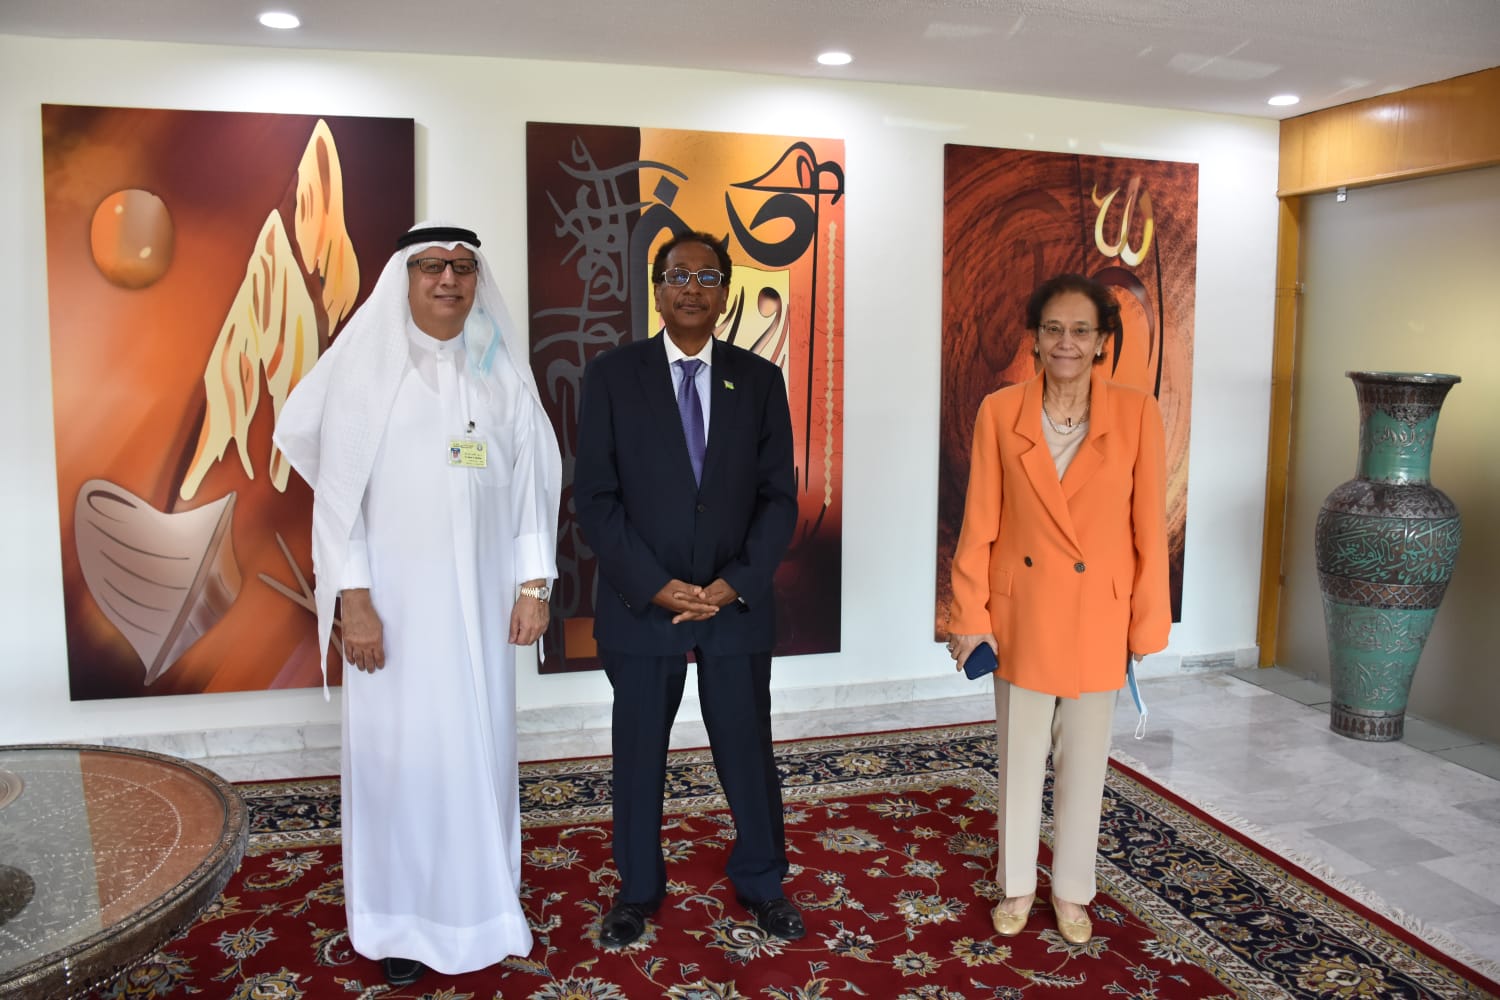 Visit of His Excellency to the Arab Planing Institute 